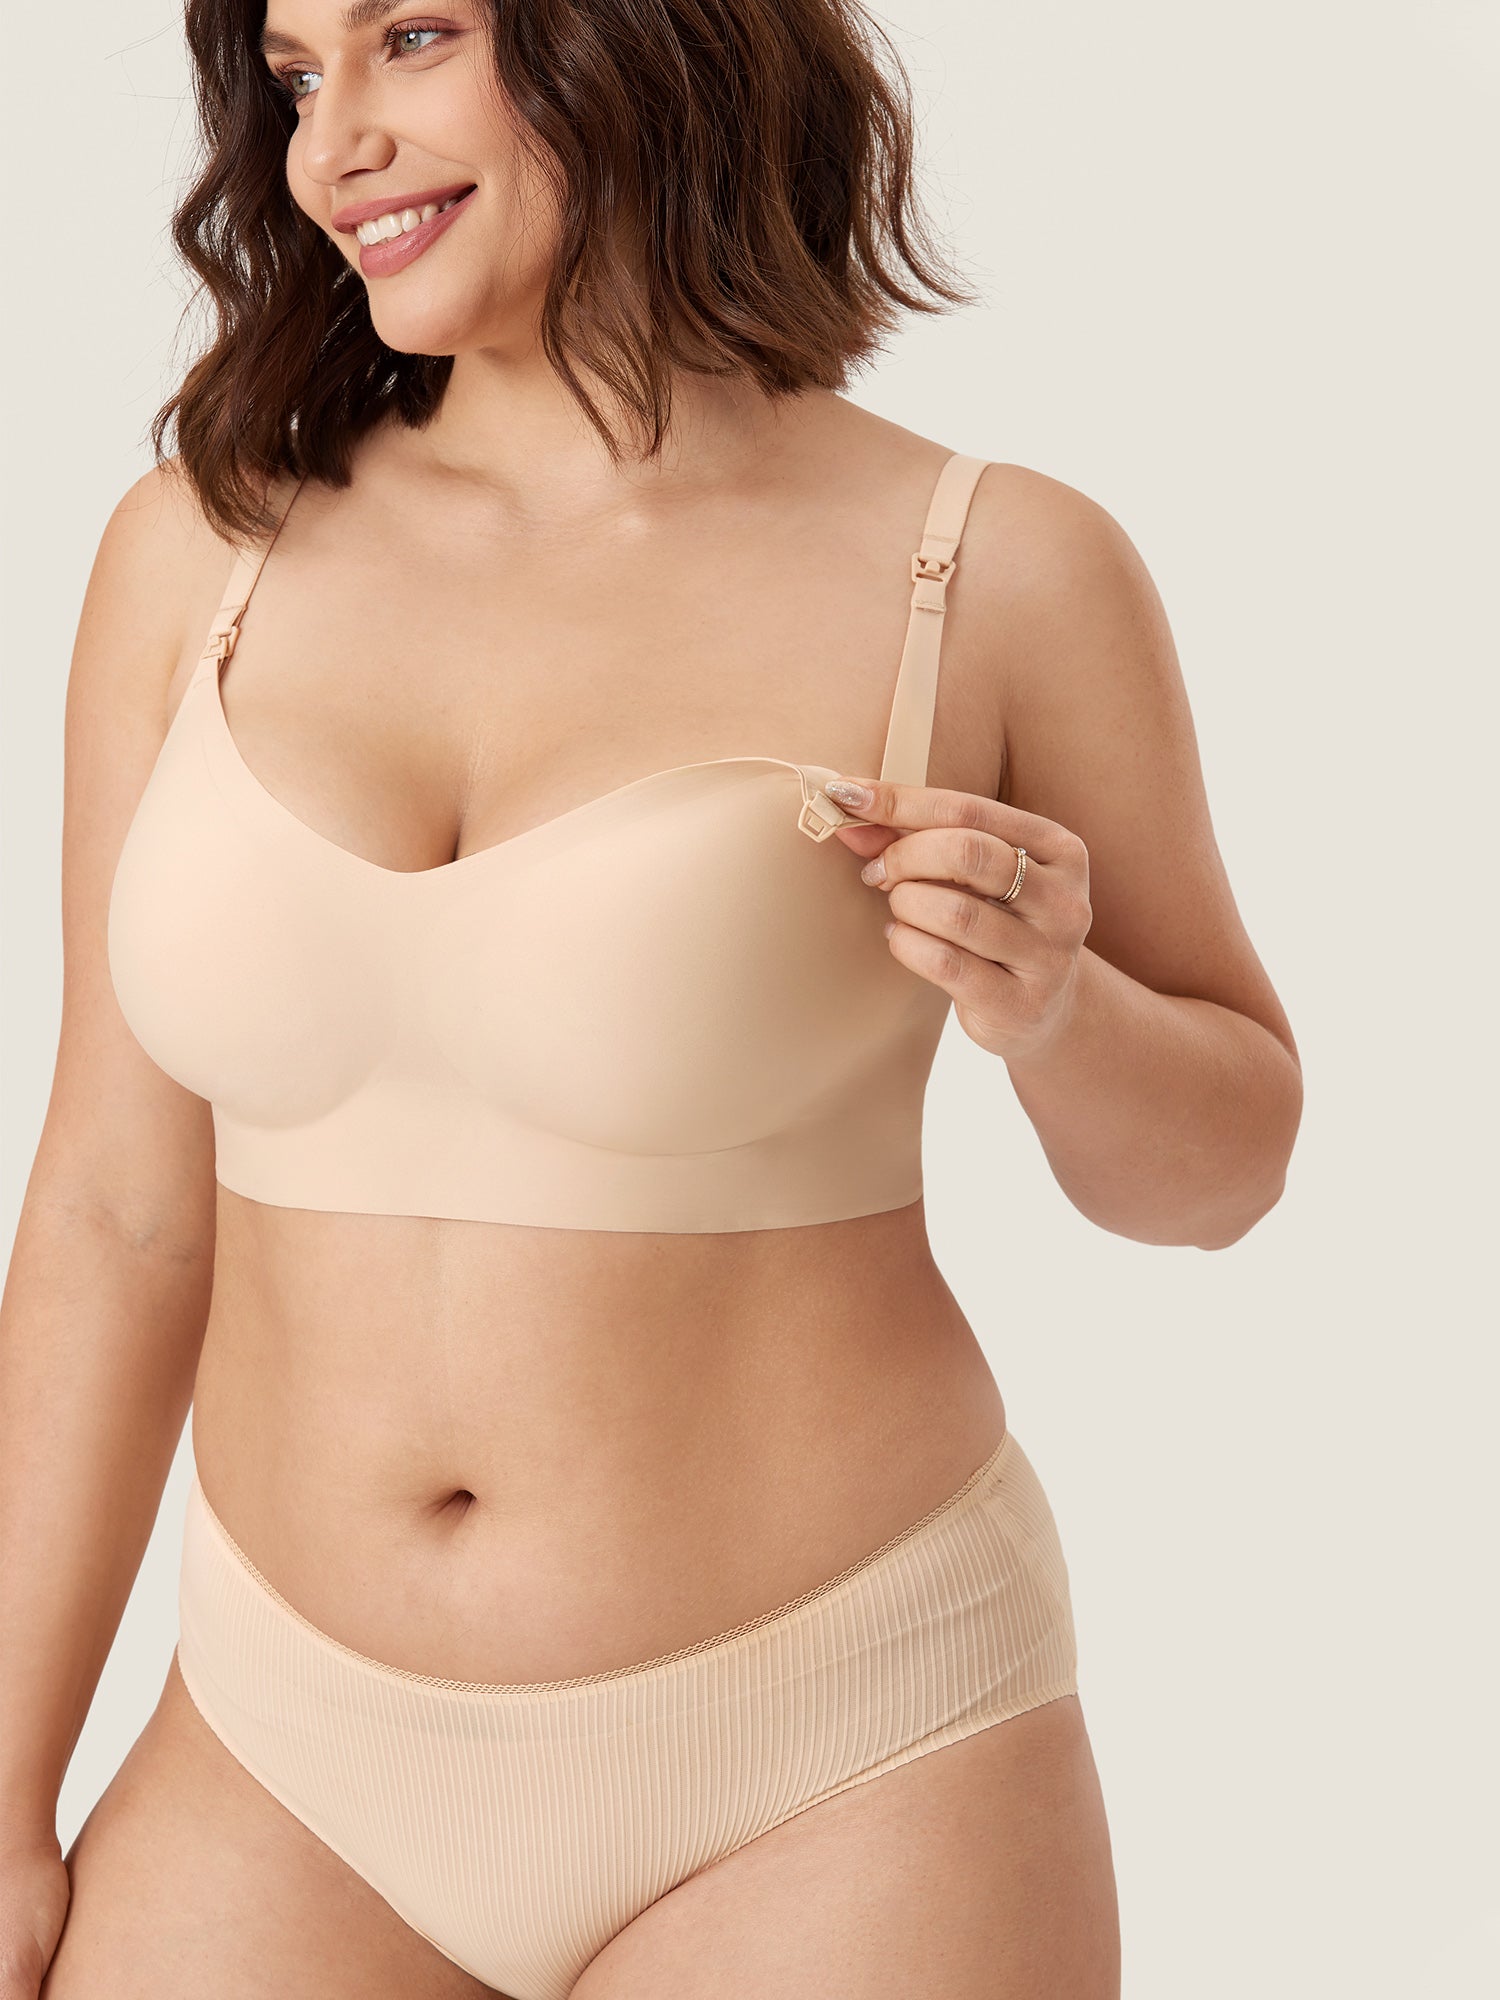 Labour for Mum Women Breastfeeding Bra Bras 46F Double Boobtapes Back  Smoothing Bras for Women Bathroom Scales UK Ston Beige : :  Fashion